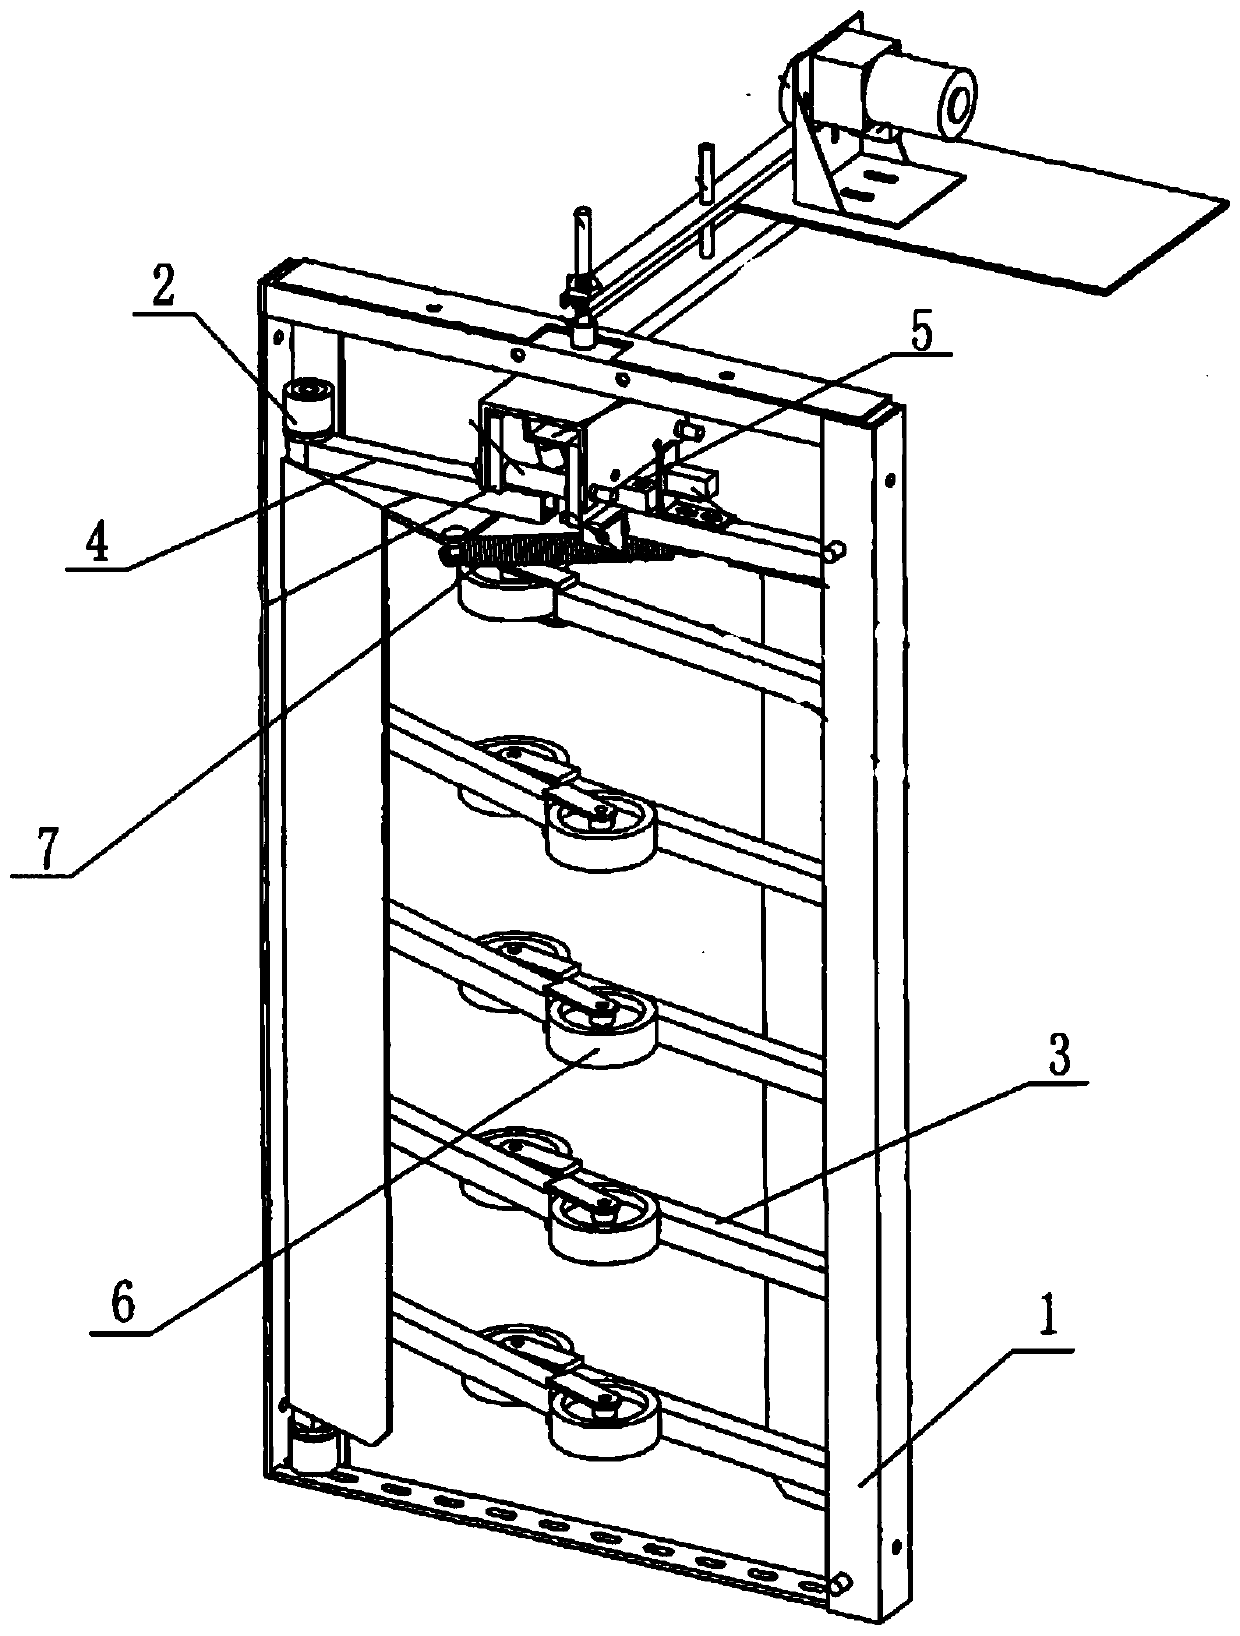 Control door for channel for pig to enter and exit for individual feeding and feeding device